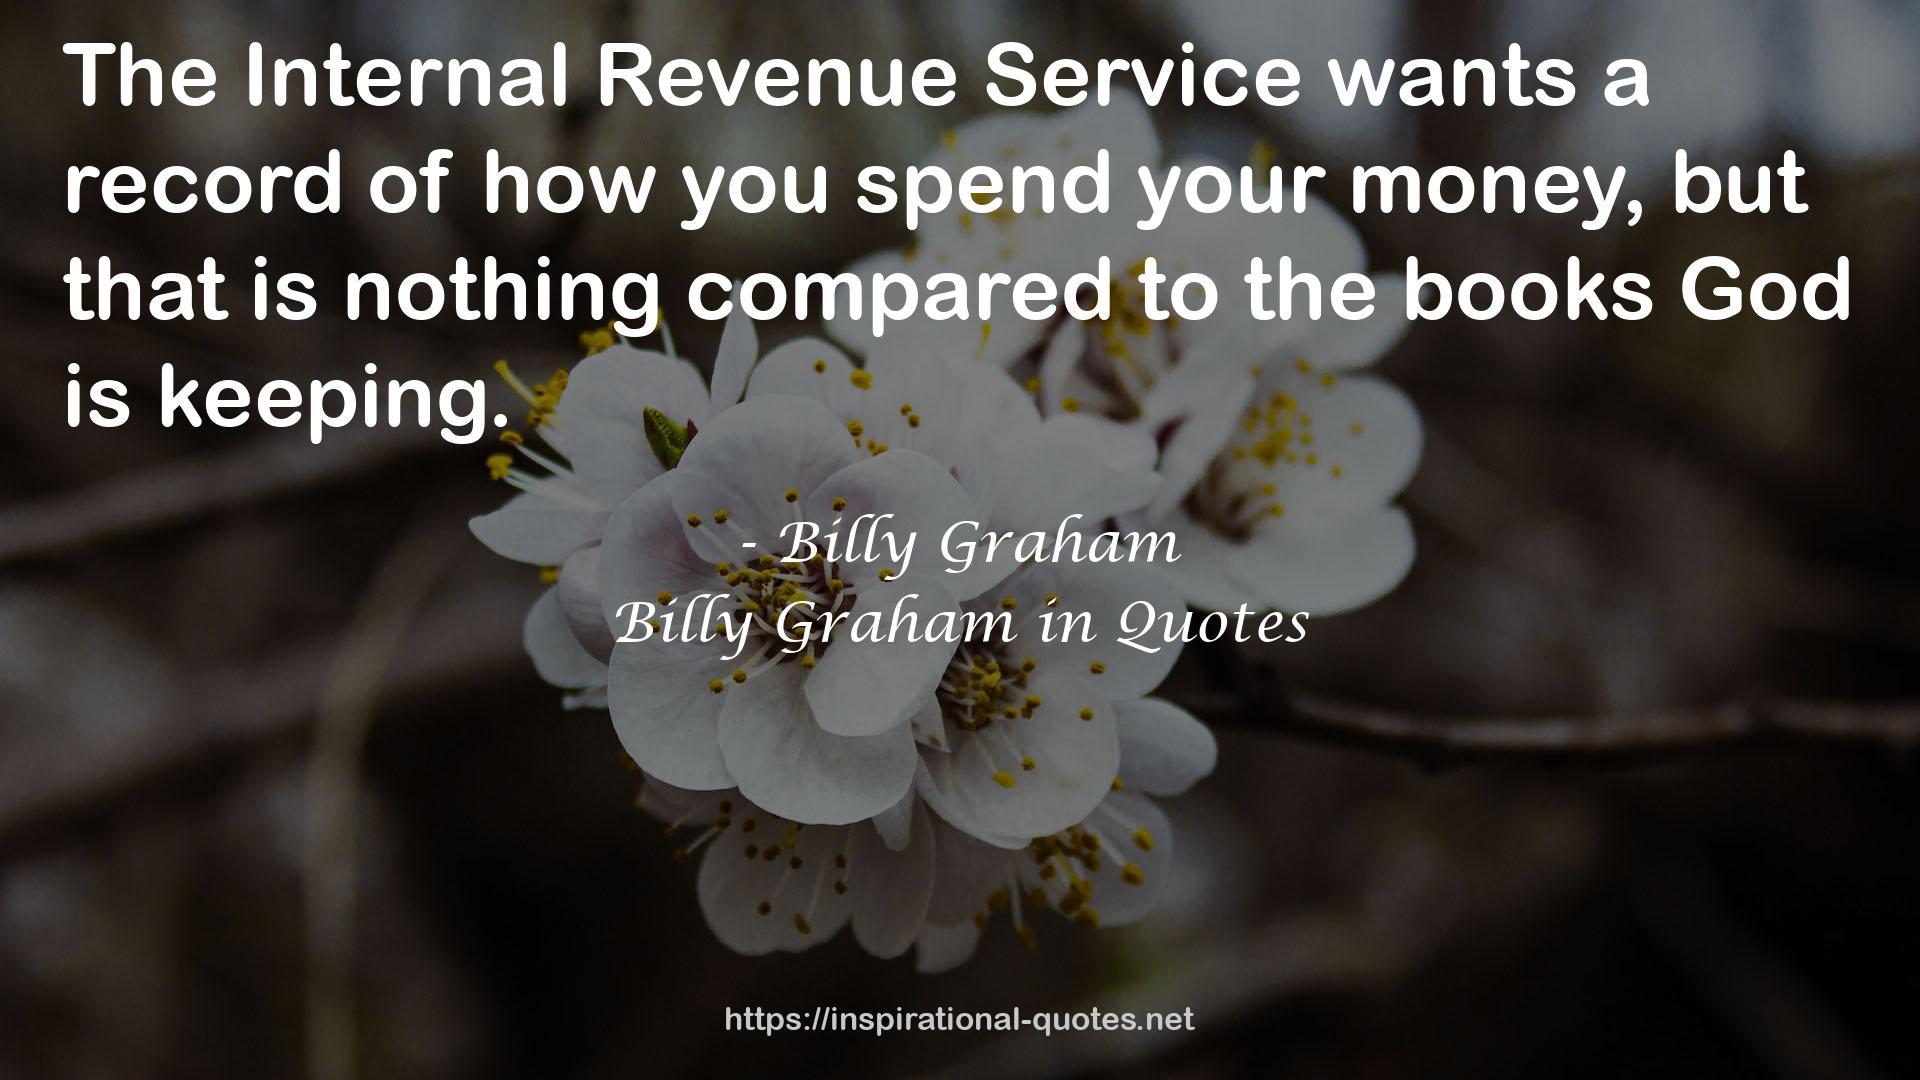 Billy Graham QUOTES